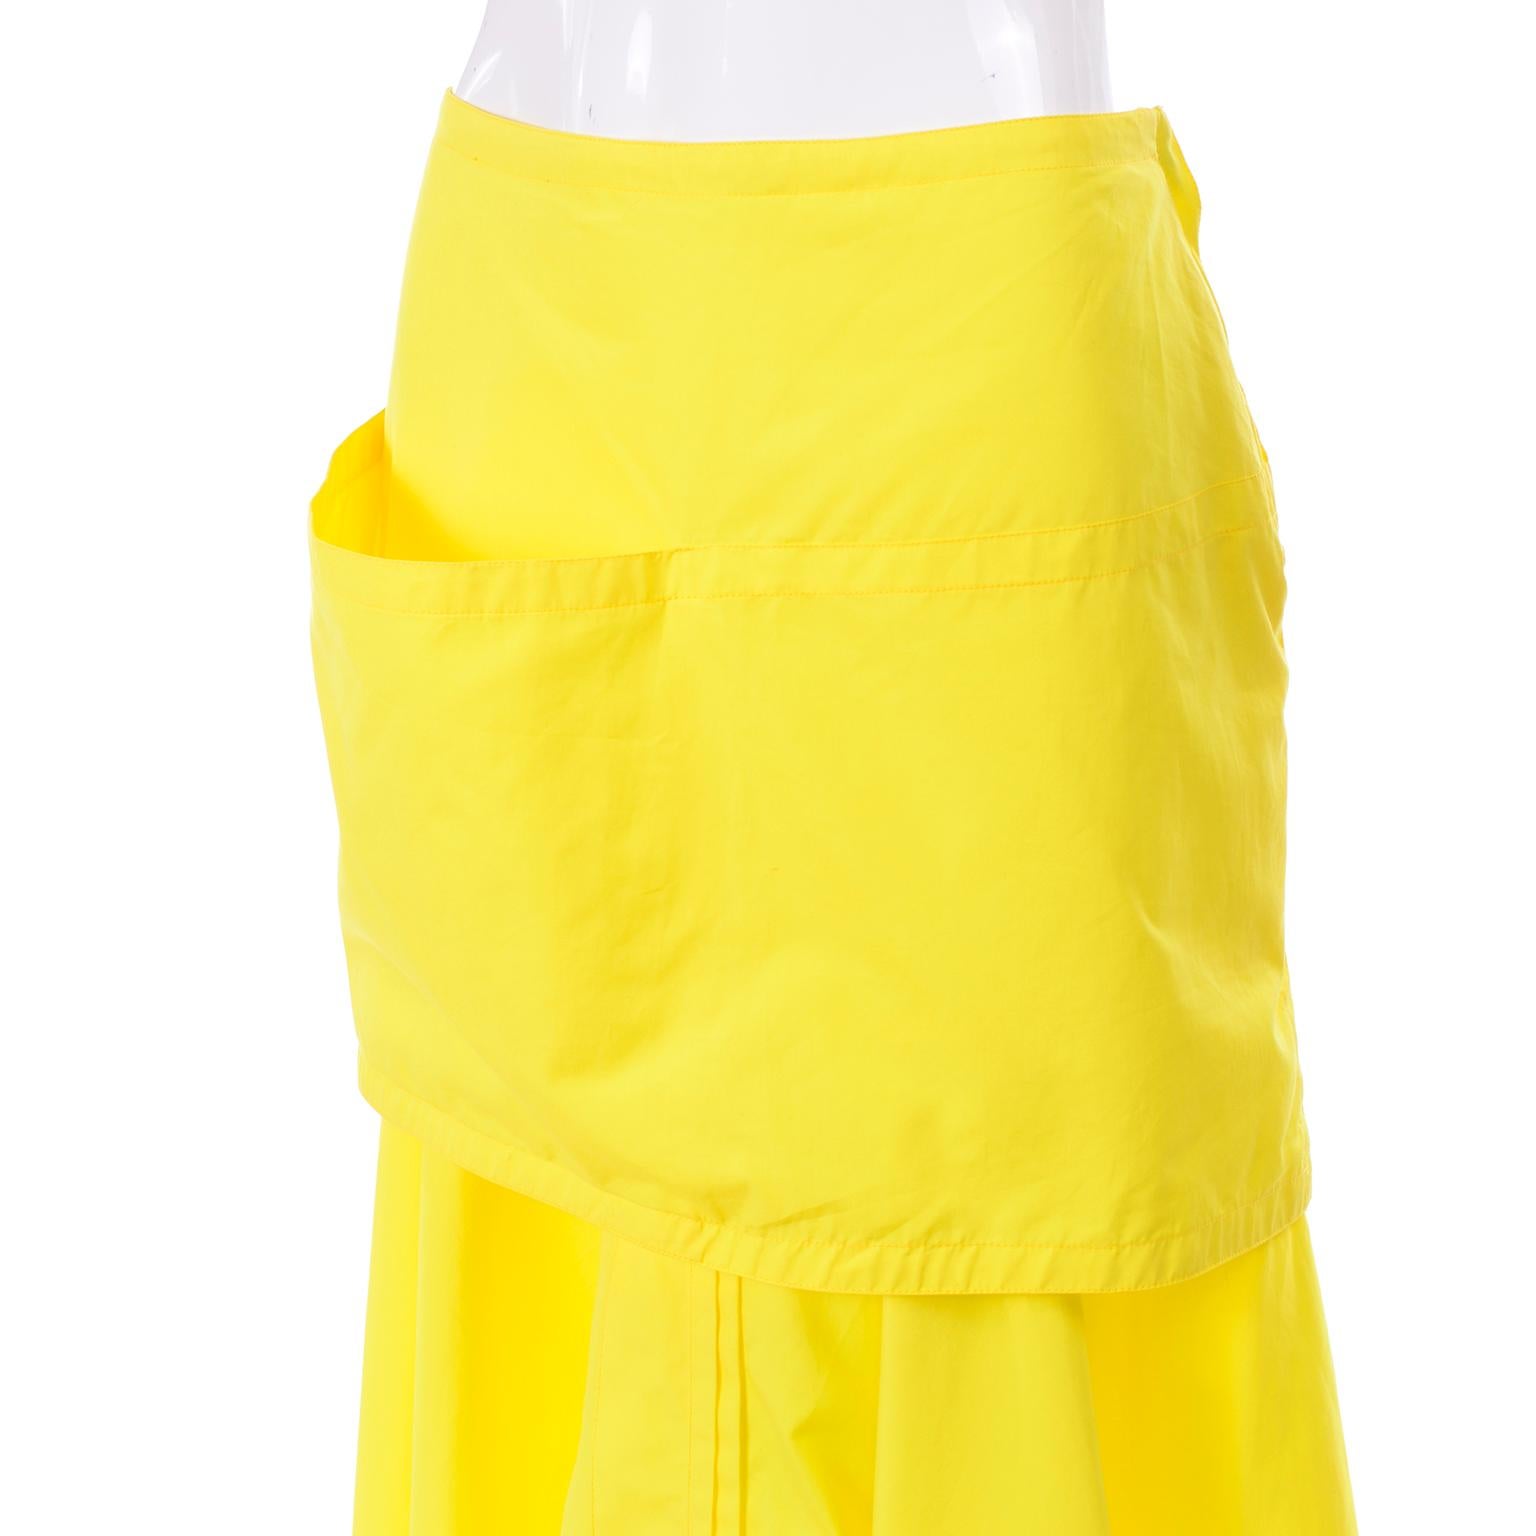 New 1980s Gianni Versace Yellow Cotton Flared Skirt w Front Pocket Apron w/ Tags In New Condition For Sale In Portland, OR